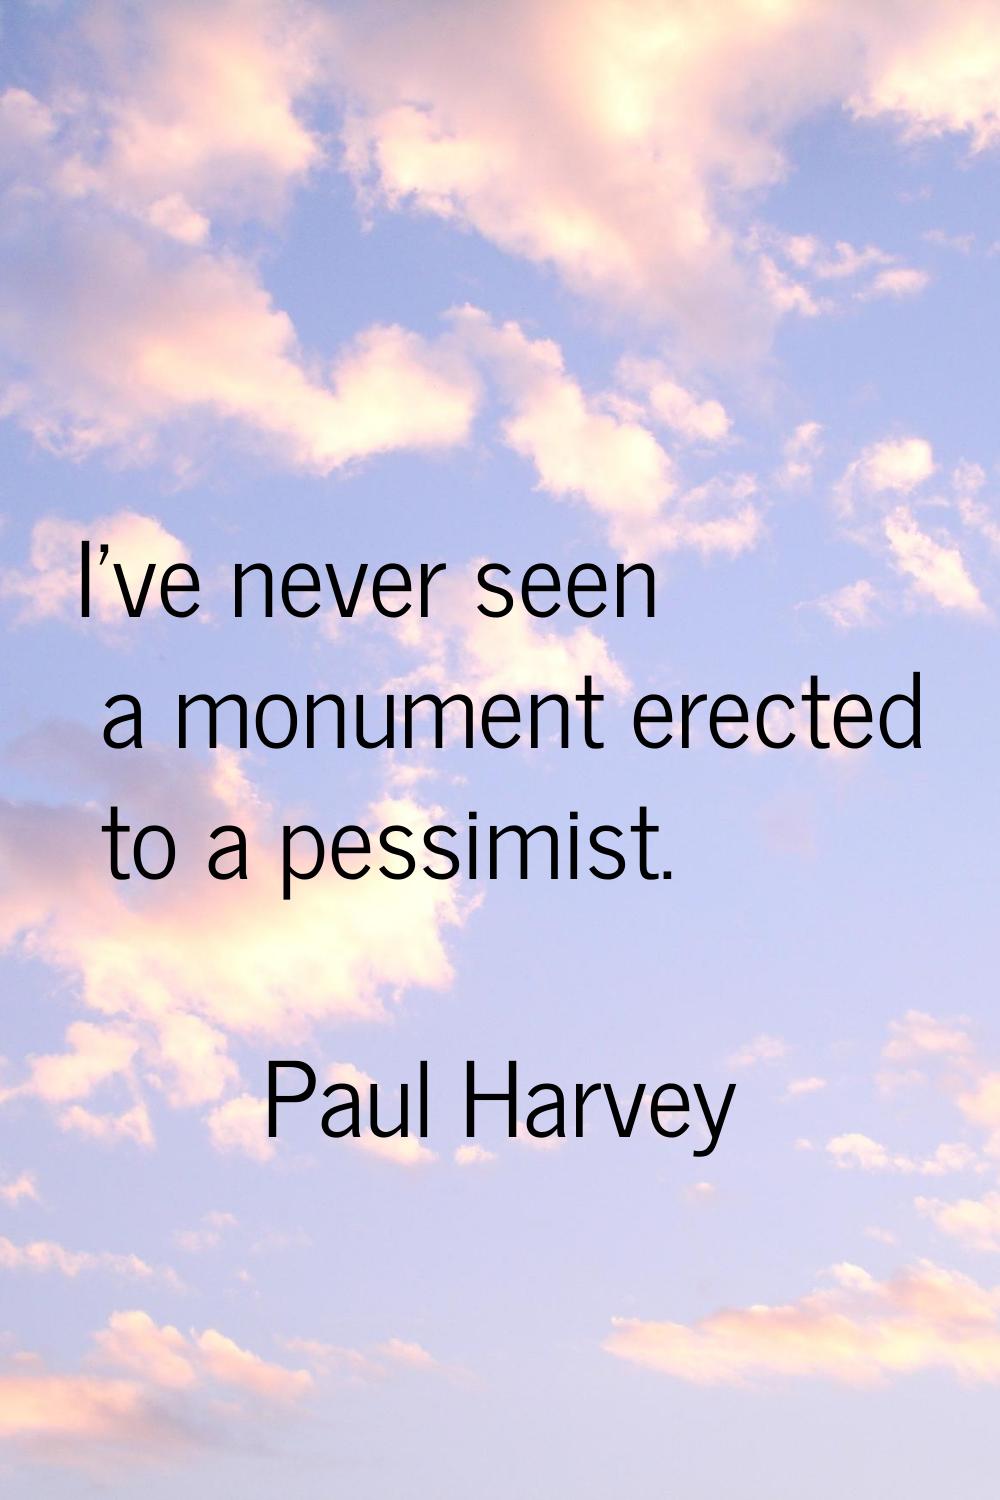 I've never seen a monument erected to a pessimist.